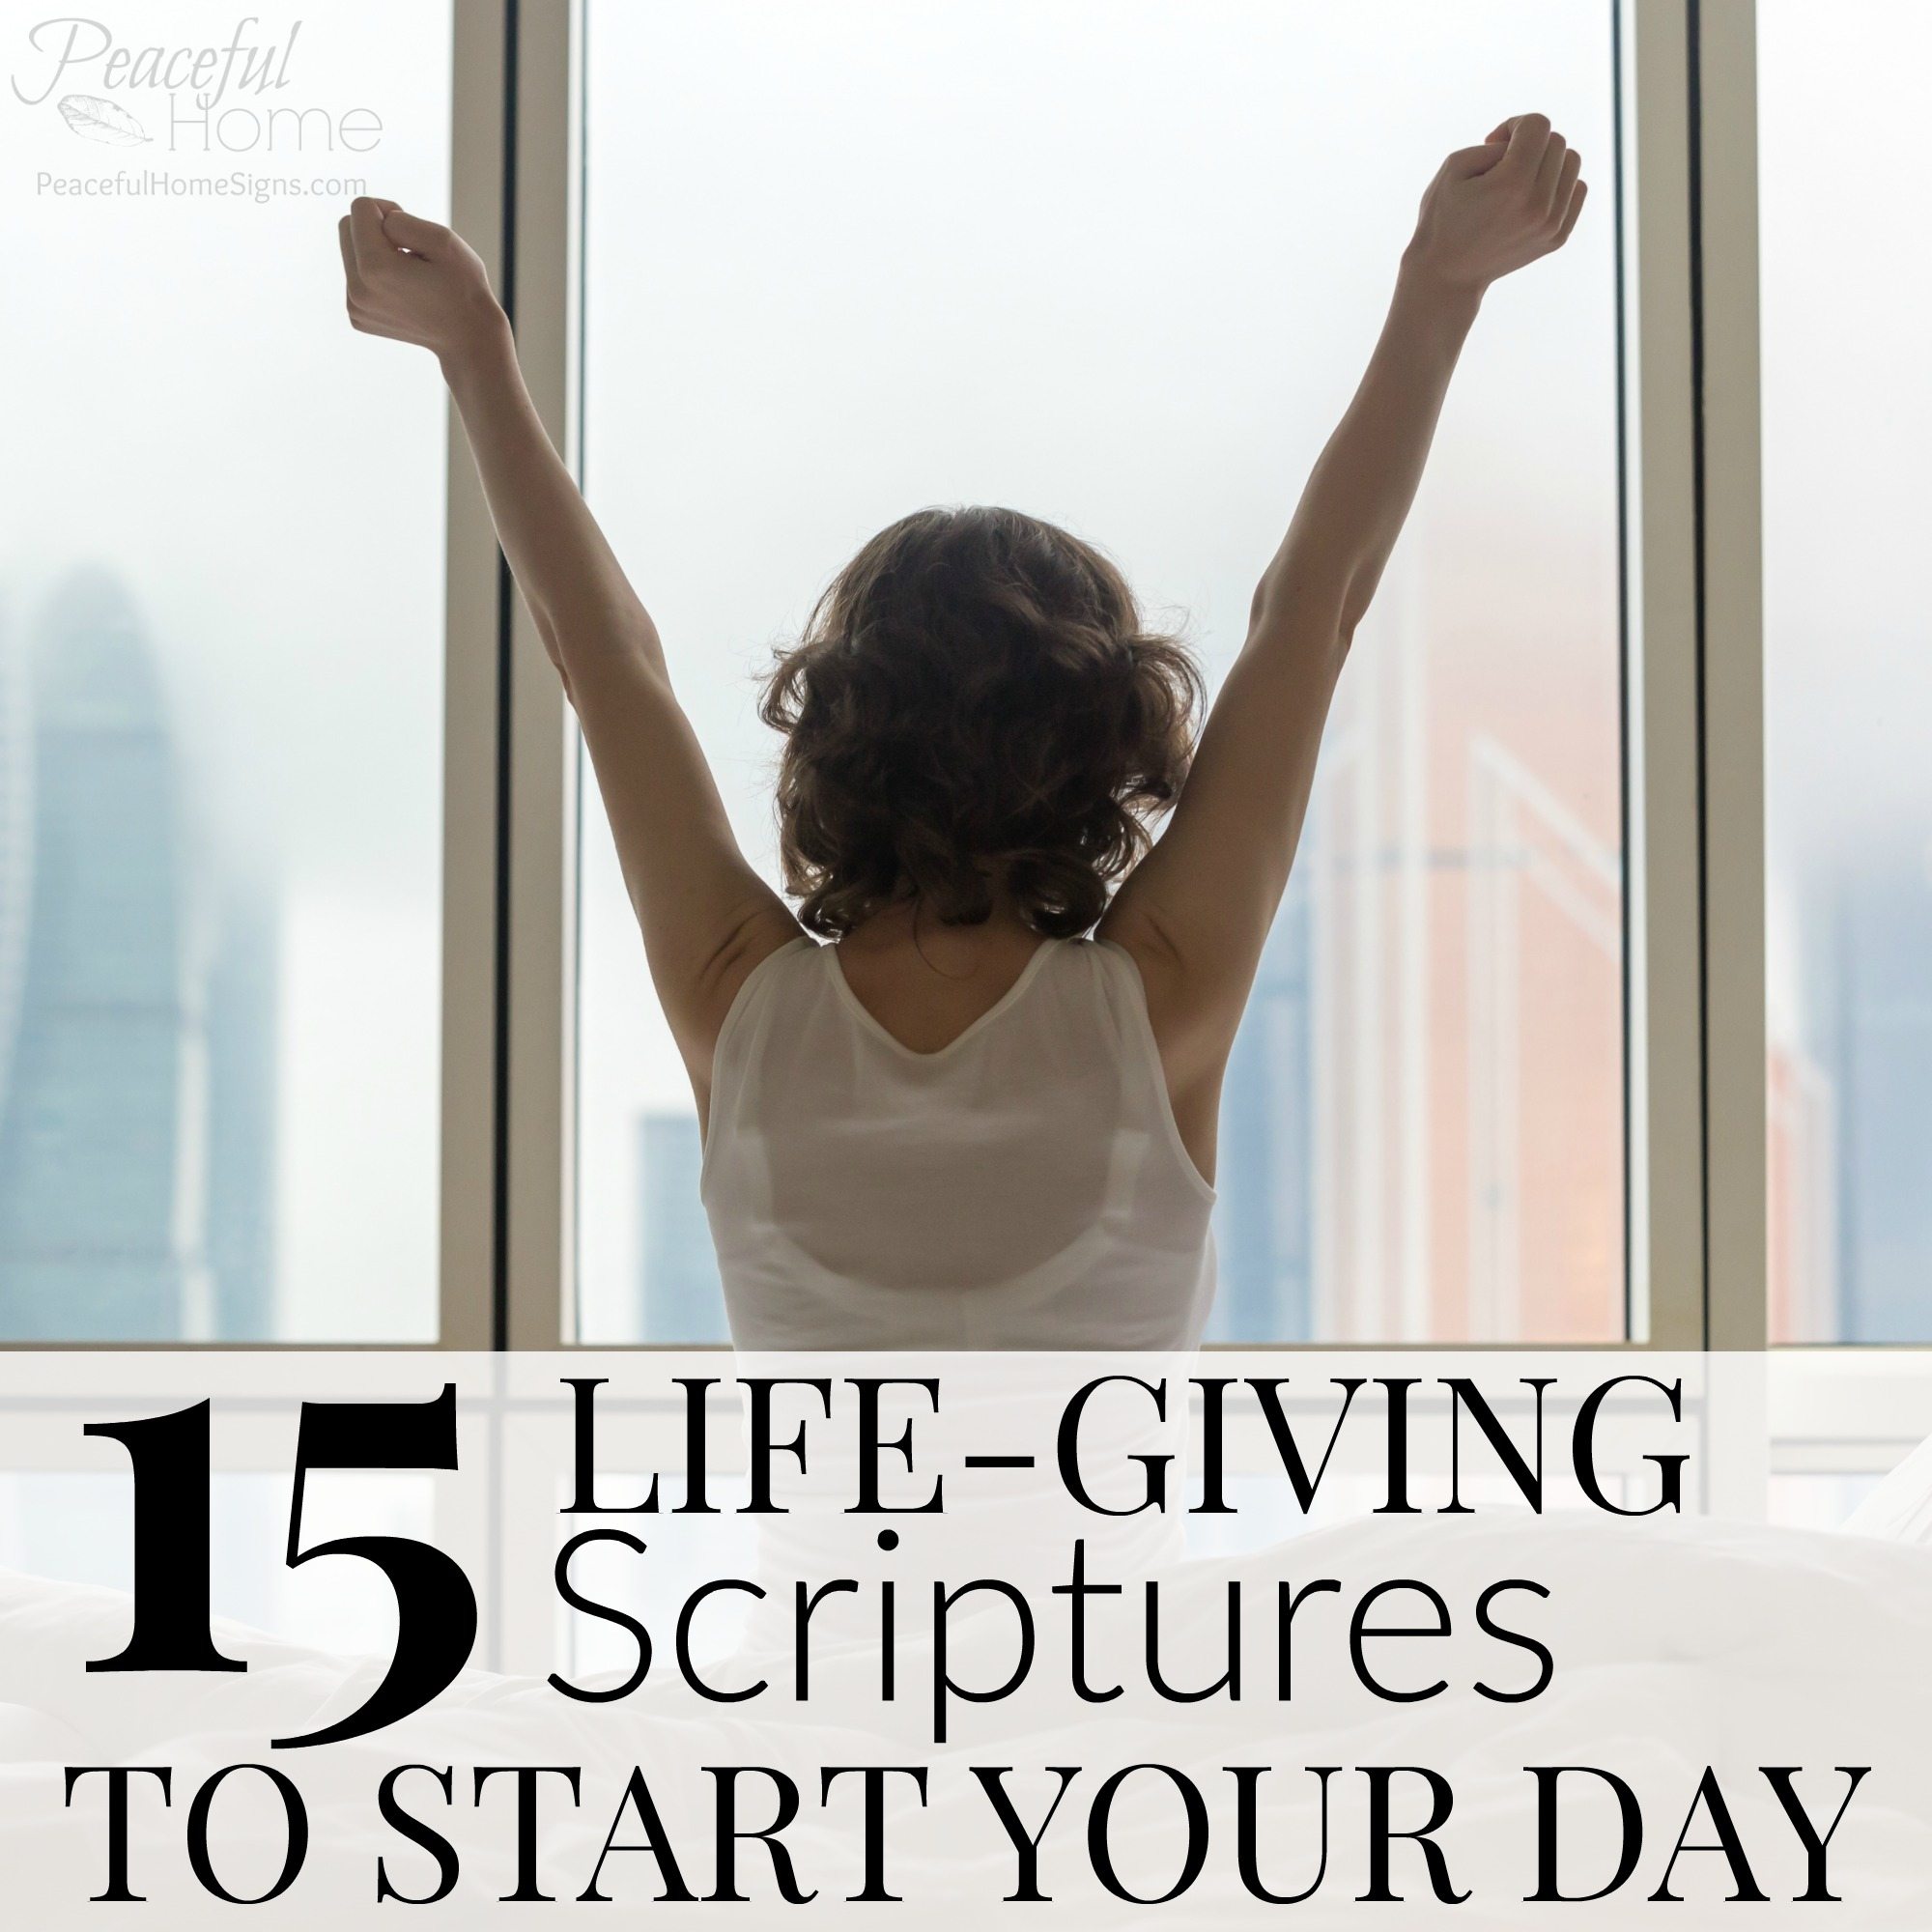 15 Life-Giving Scriptures to Start Your Day